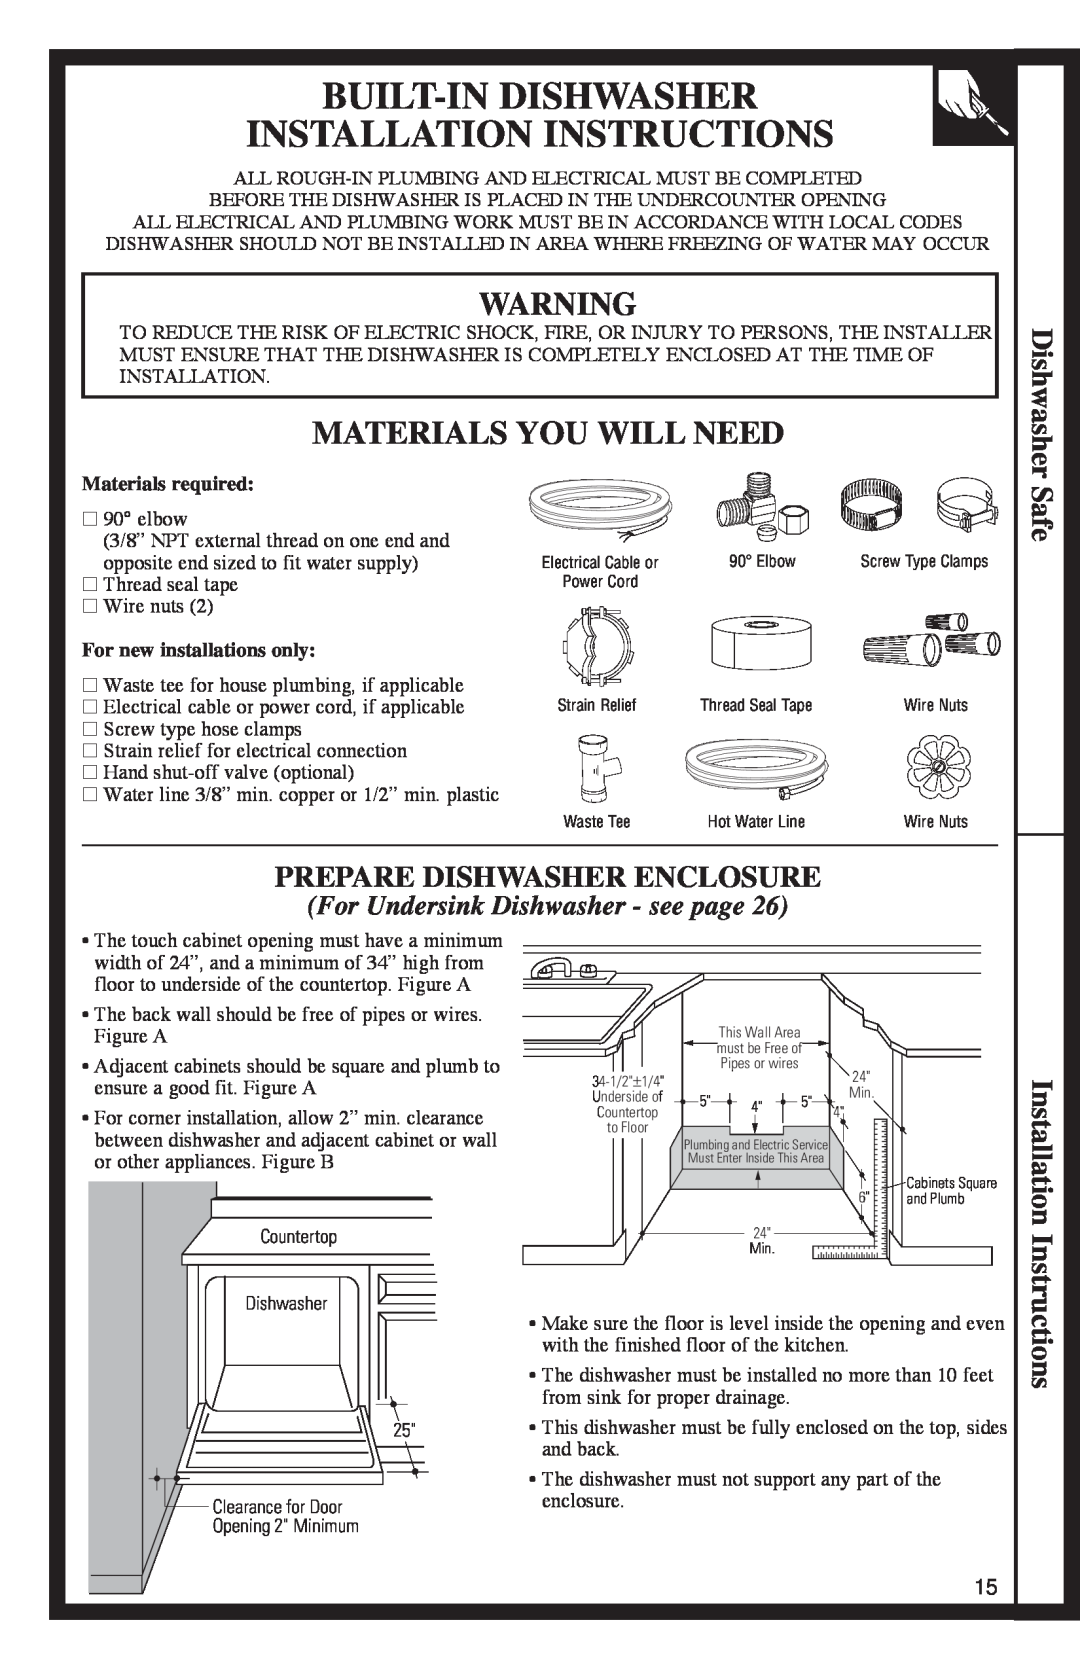 GE 500A200P047 Built-In Dishwasher Installation Instructions, Materials You Will Need, Safe, Prepare Dishwasher Enclosure 